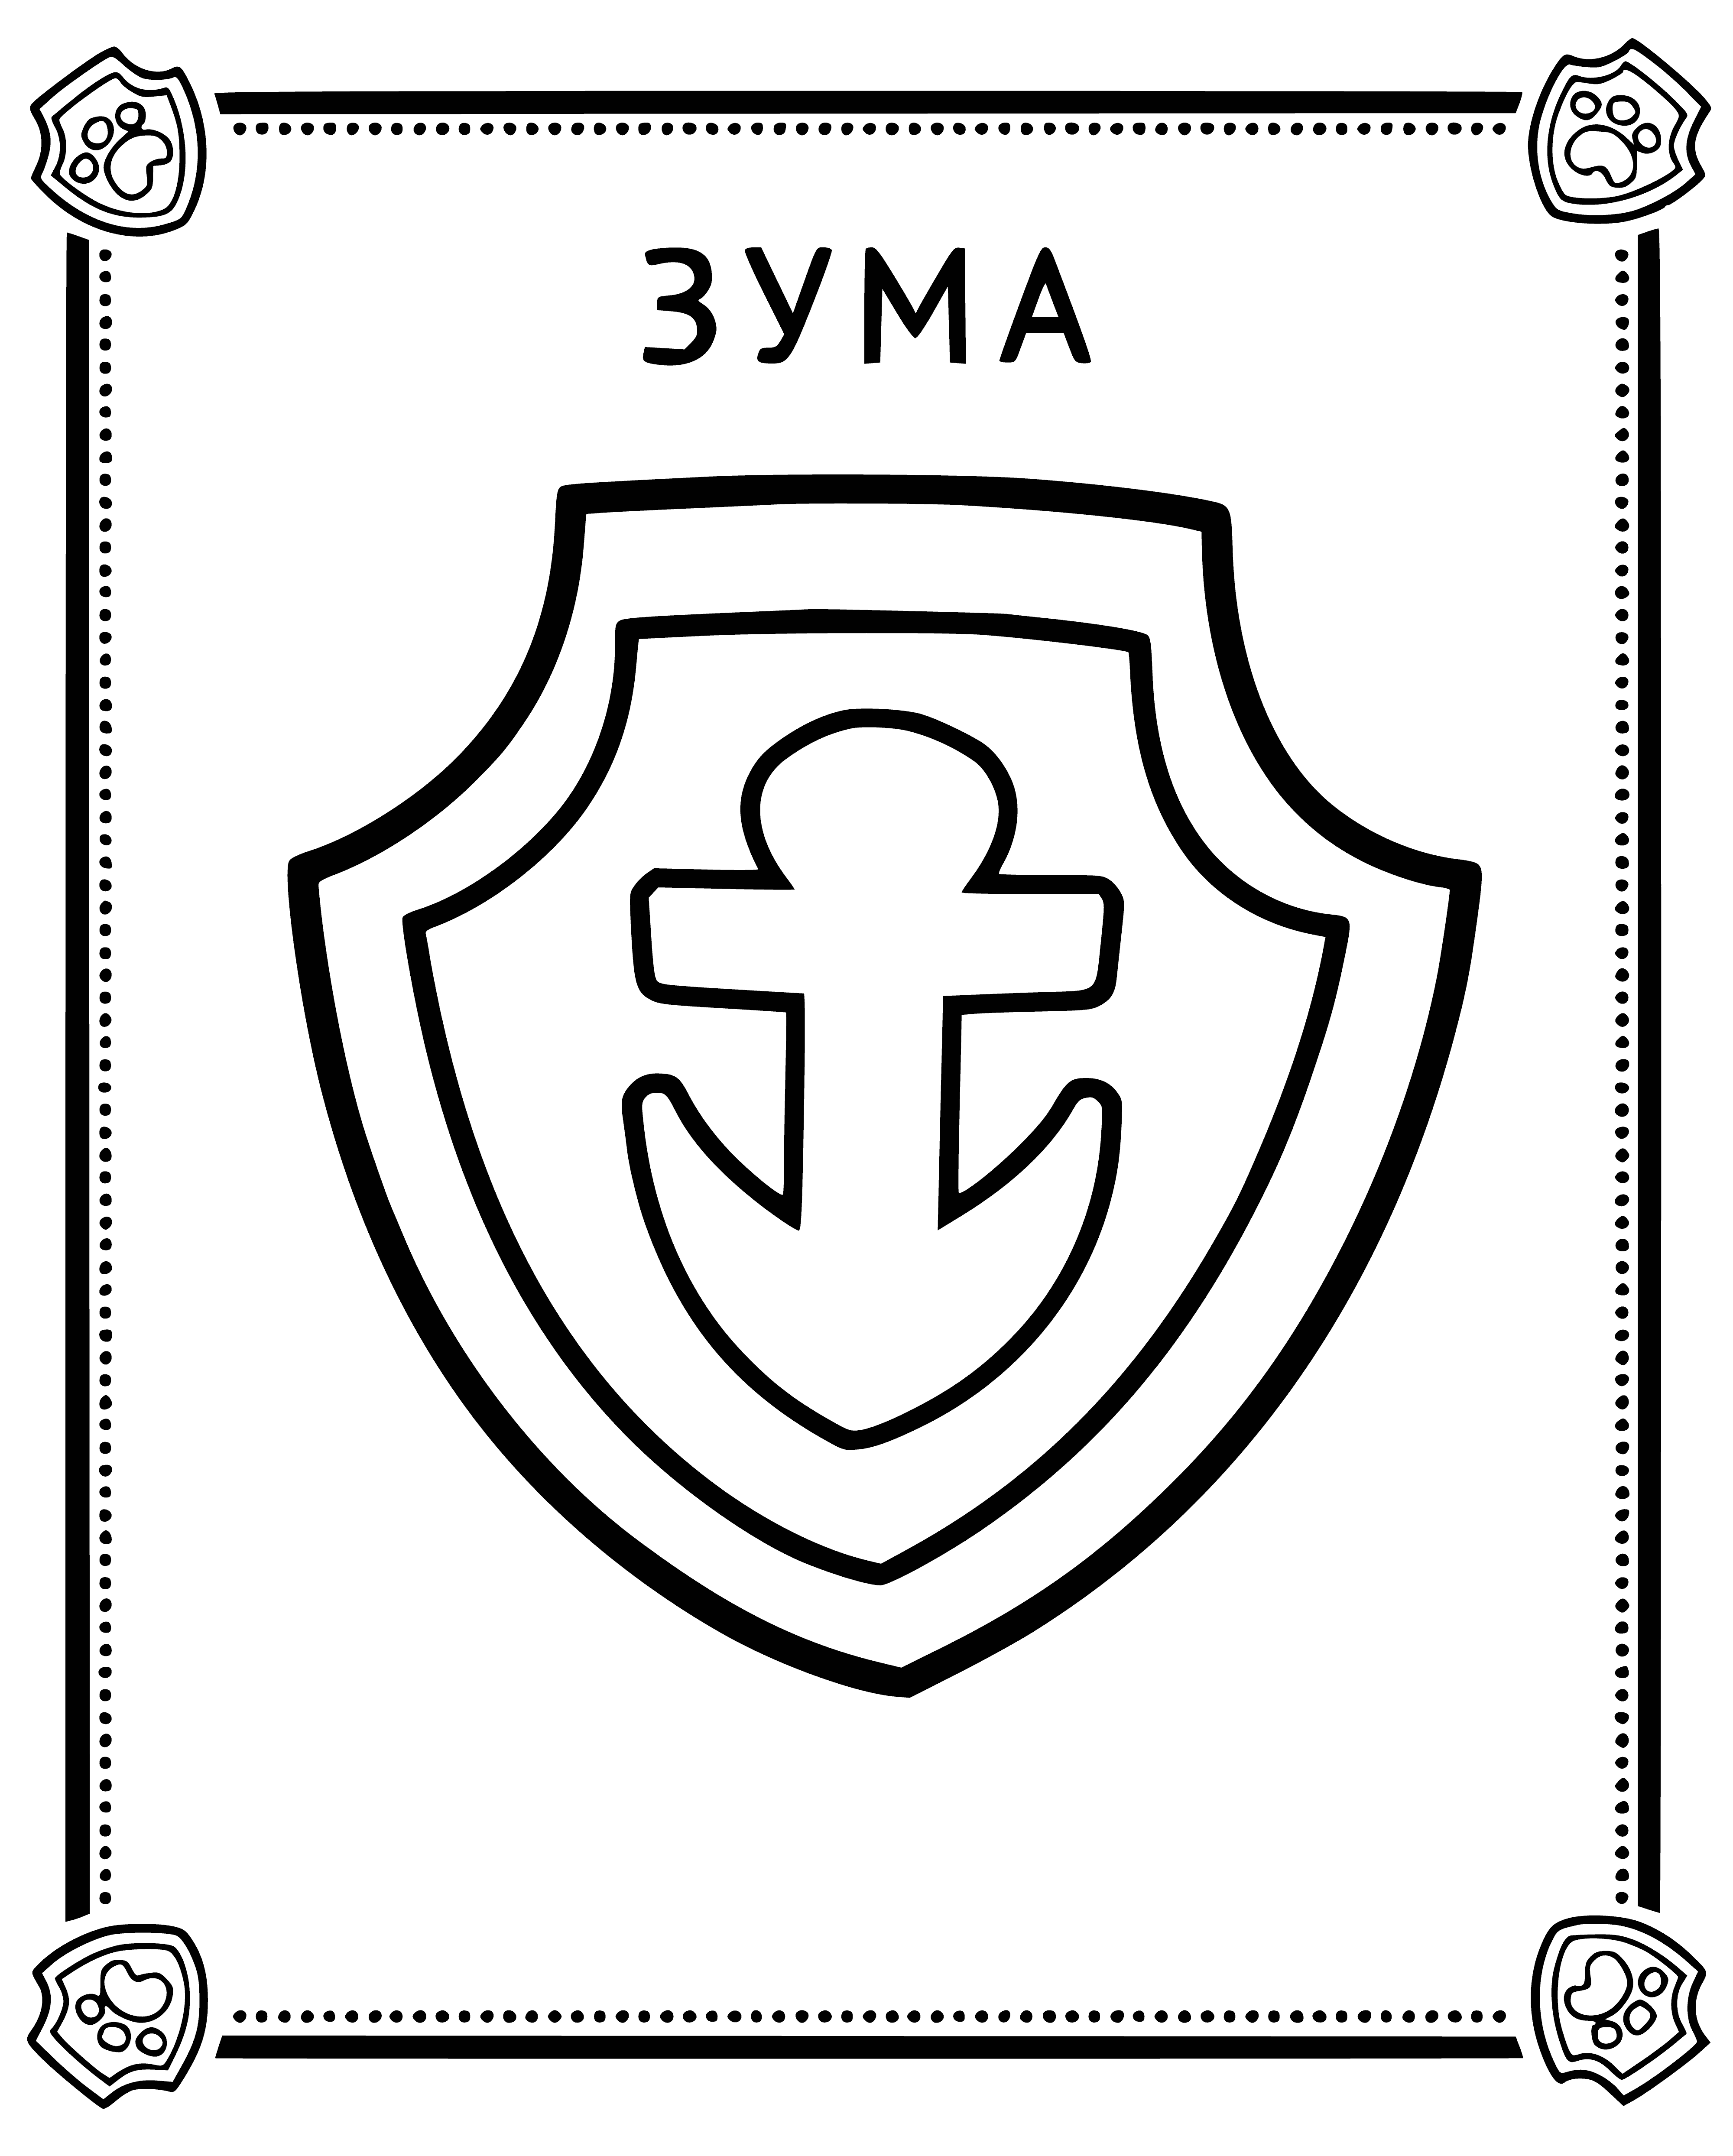 Zuma's Sign coloring page